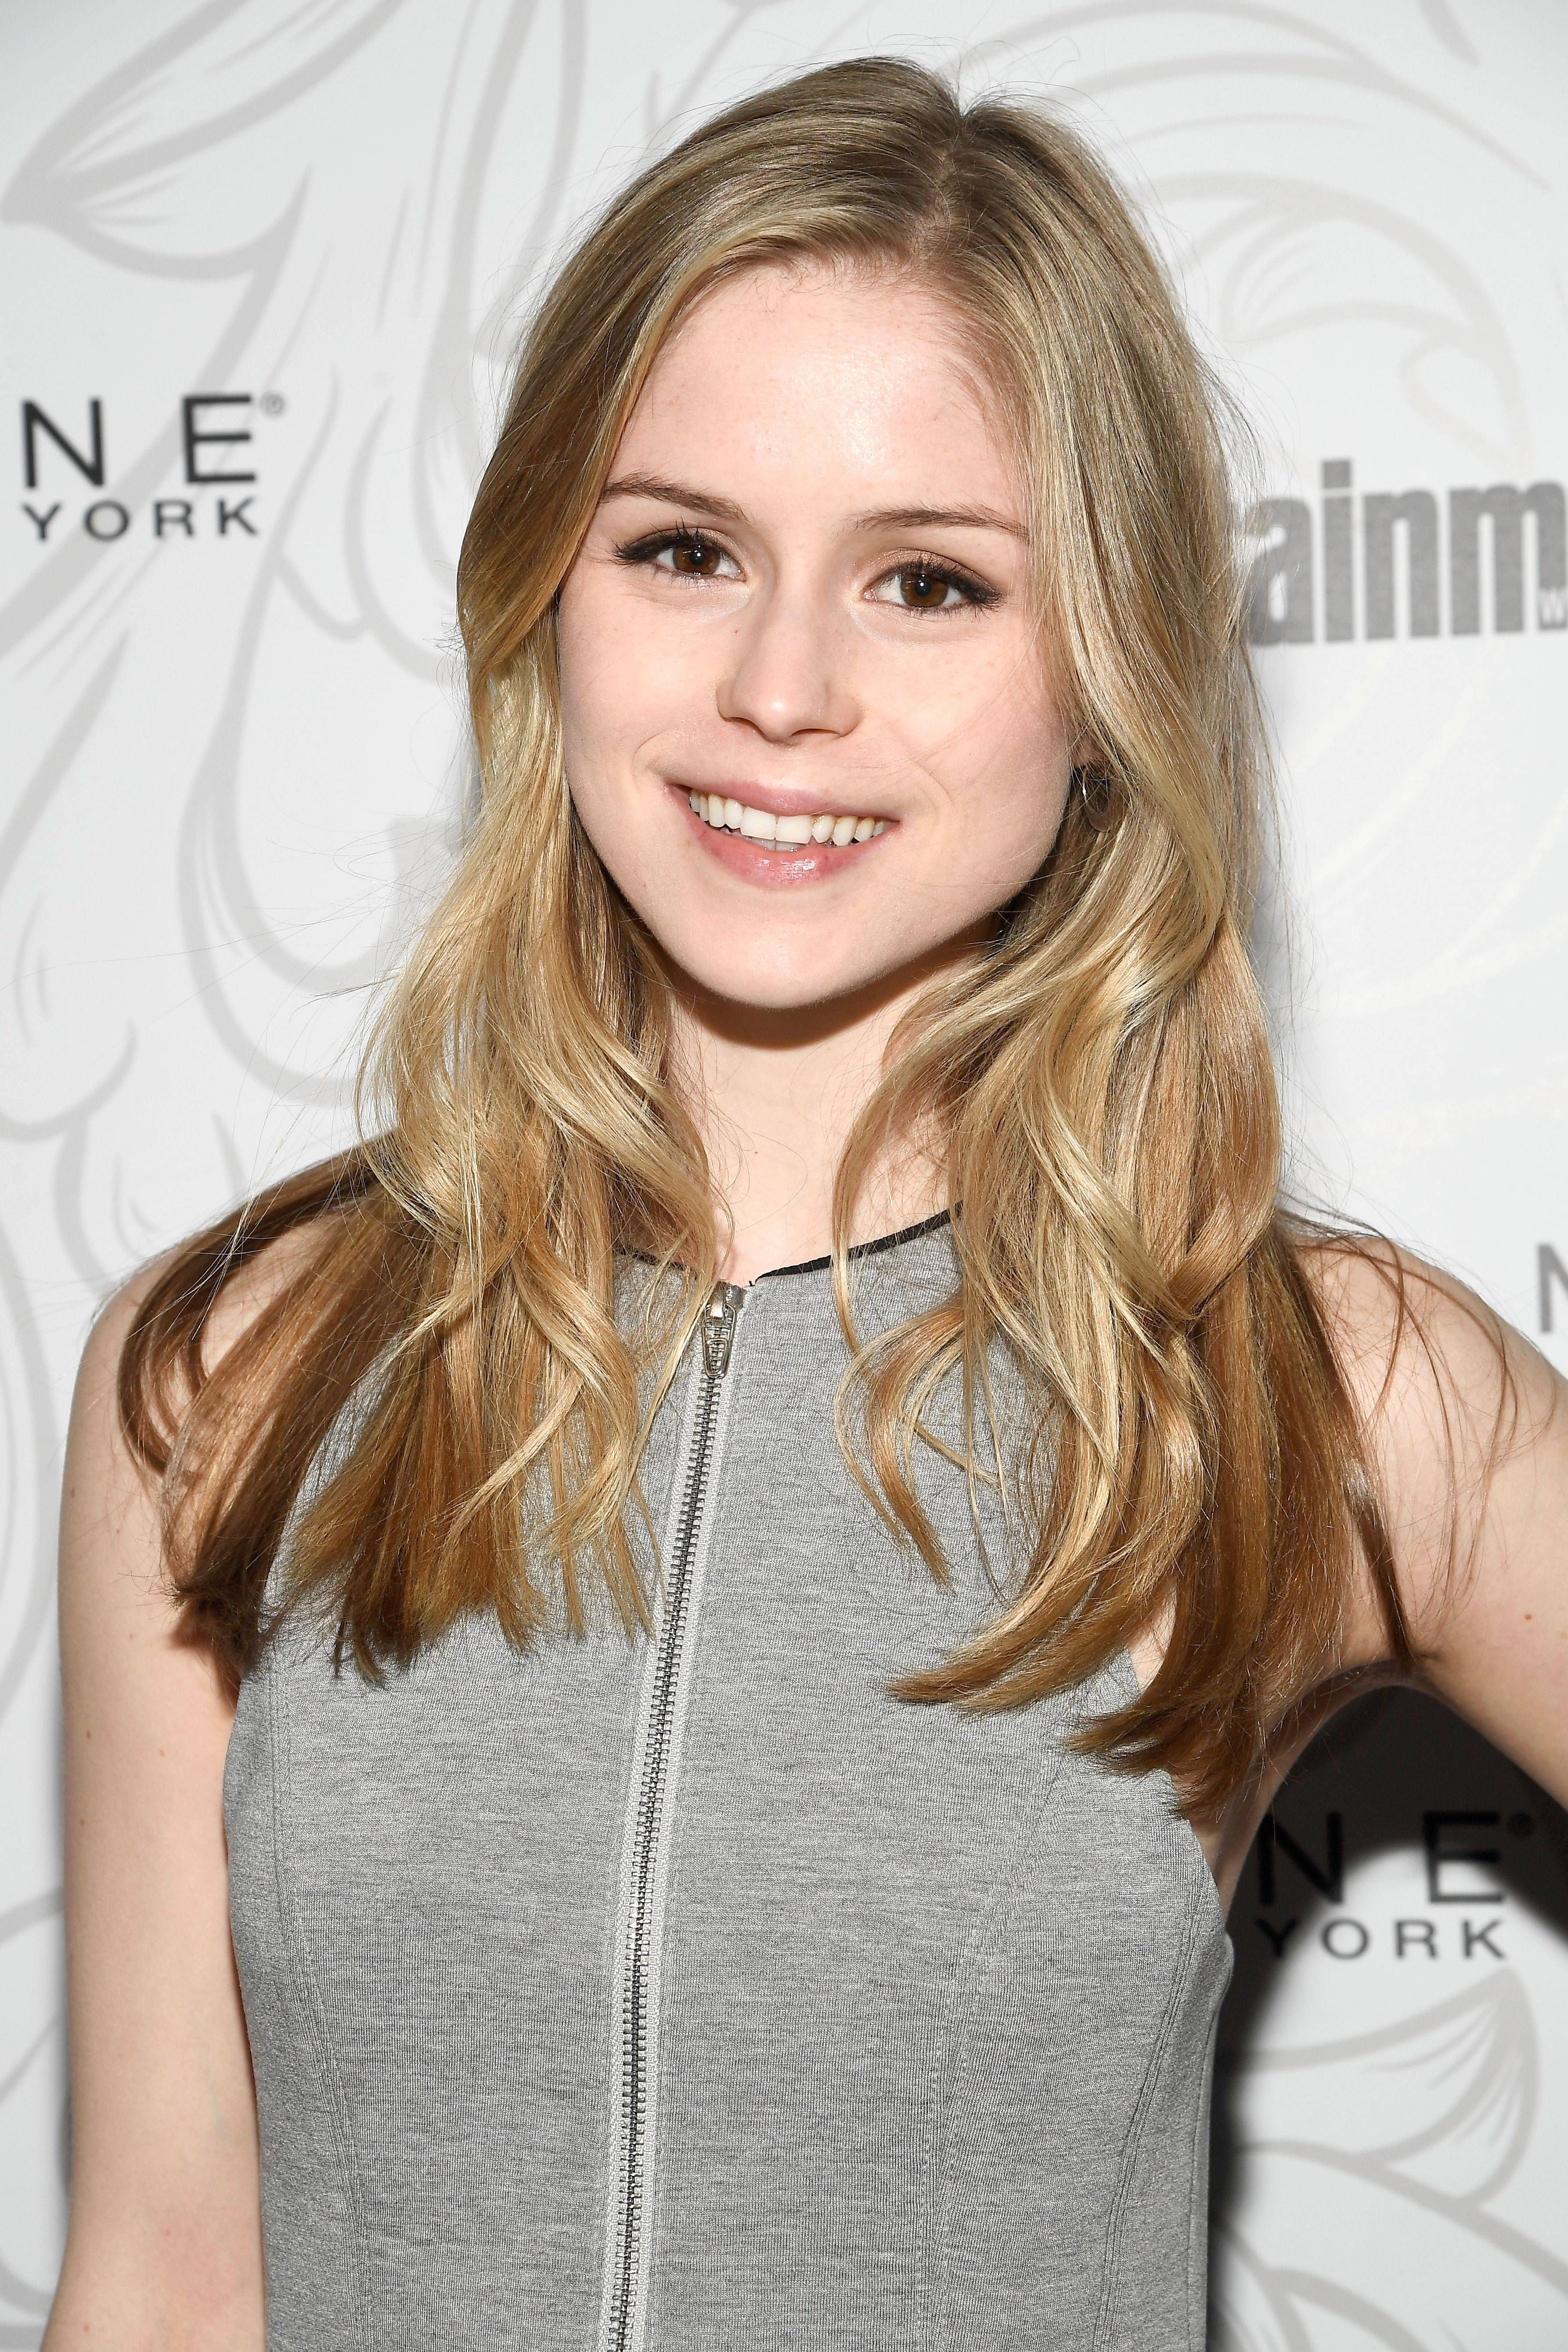 Erin Moriarty 2019 Wallpapers